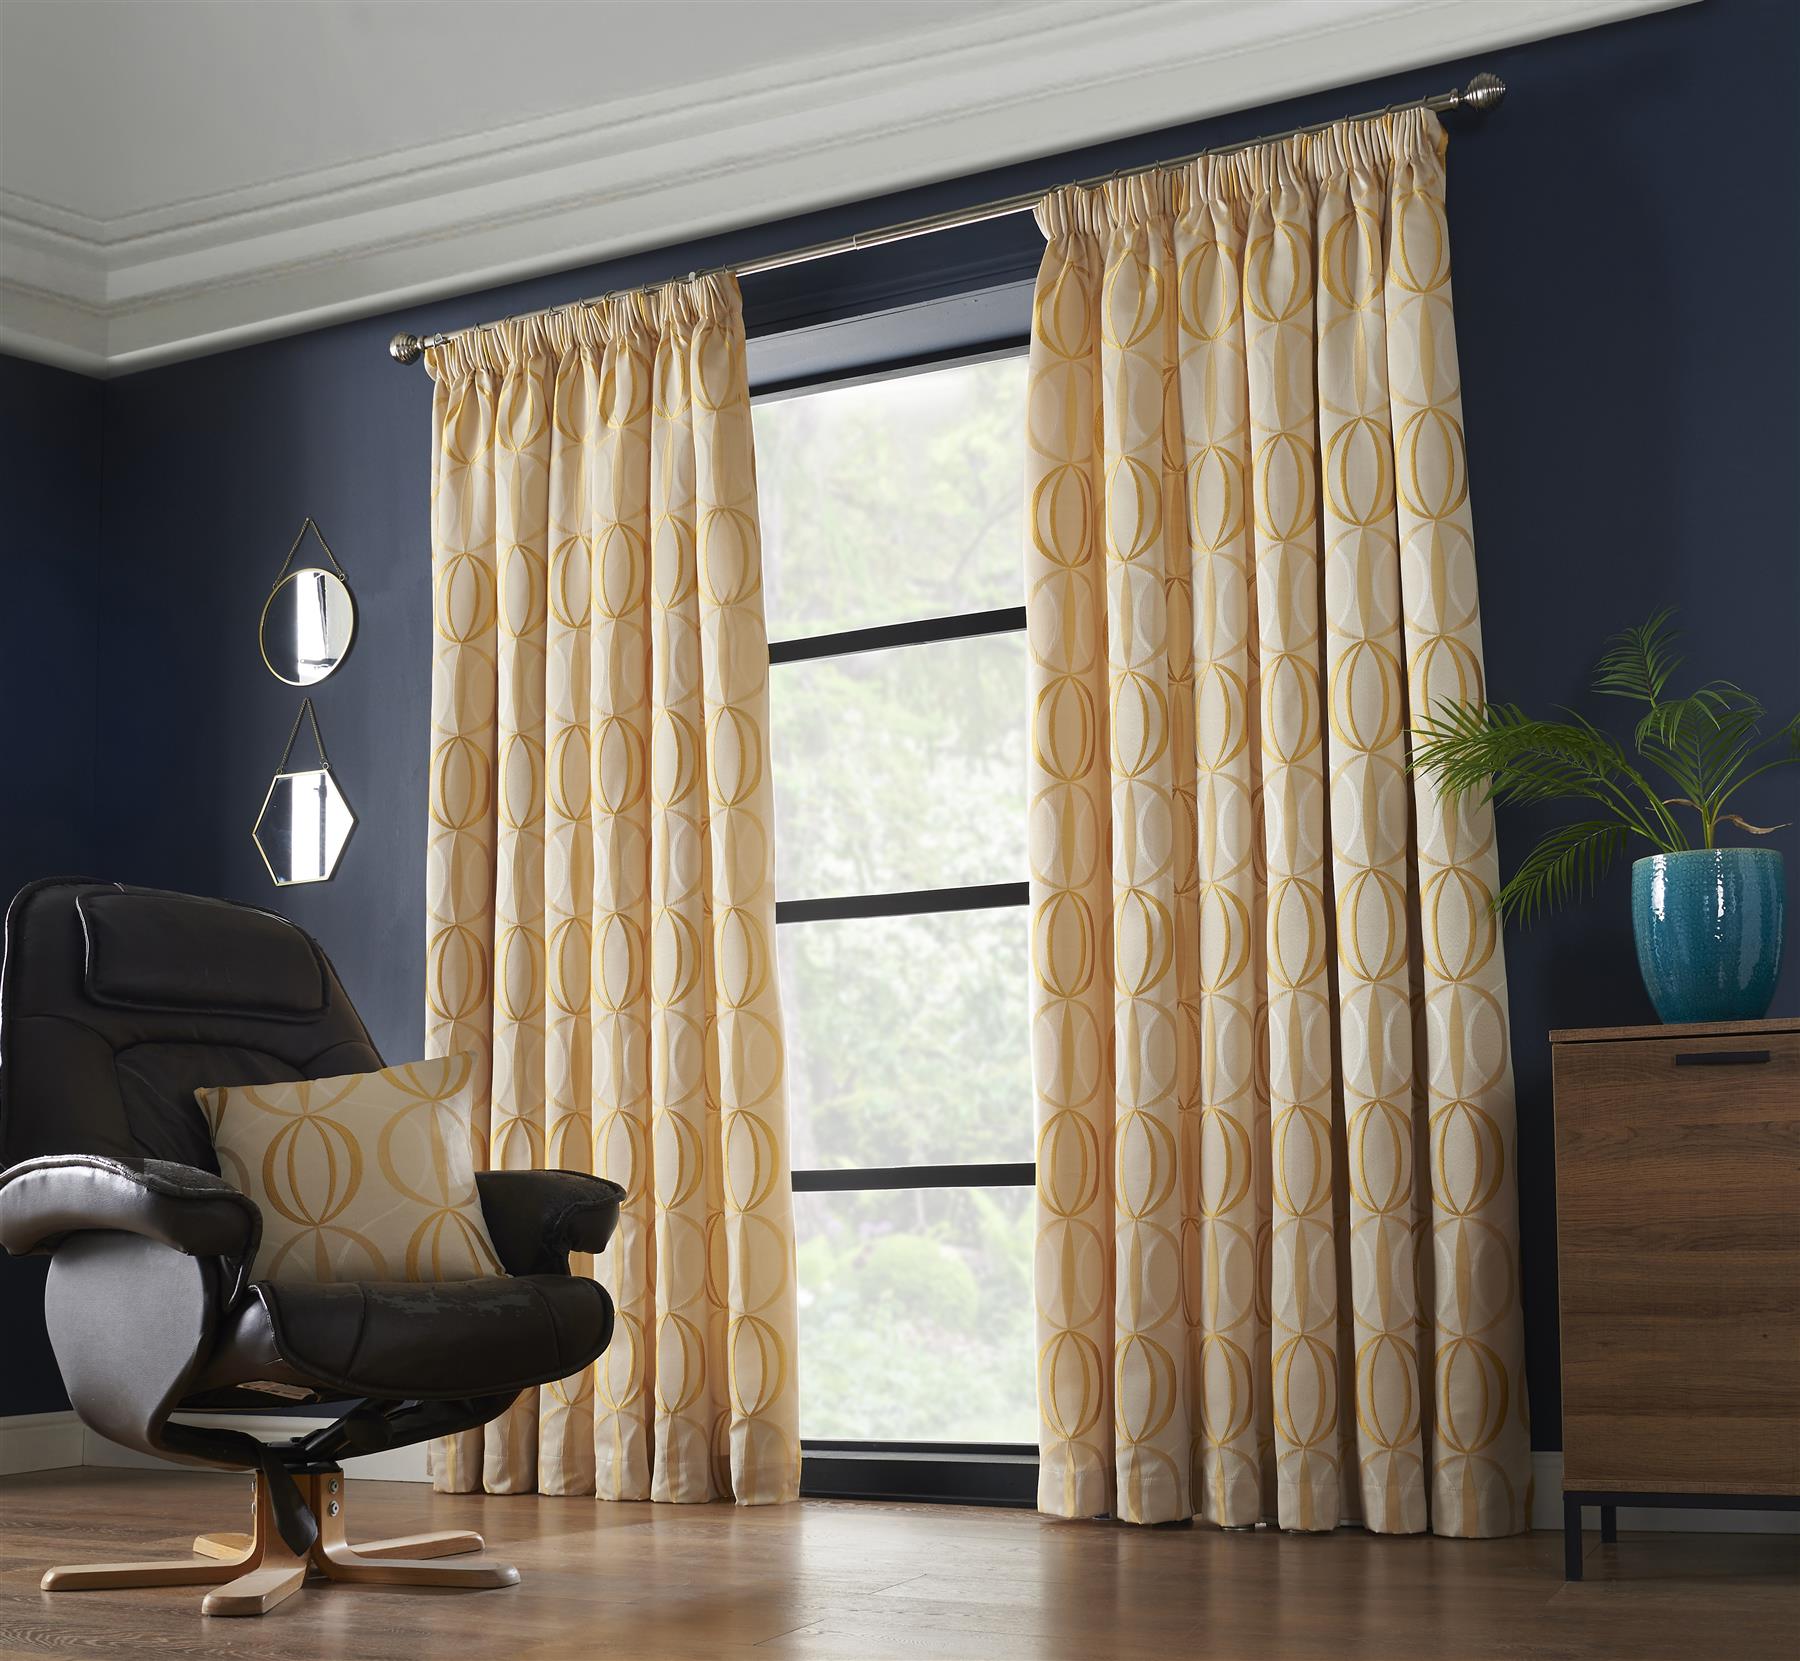 Ochre Omega Fully Lined Pencil Pleat Curtains Pair